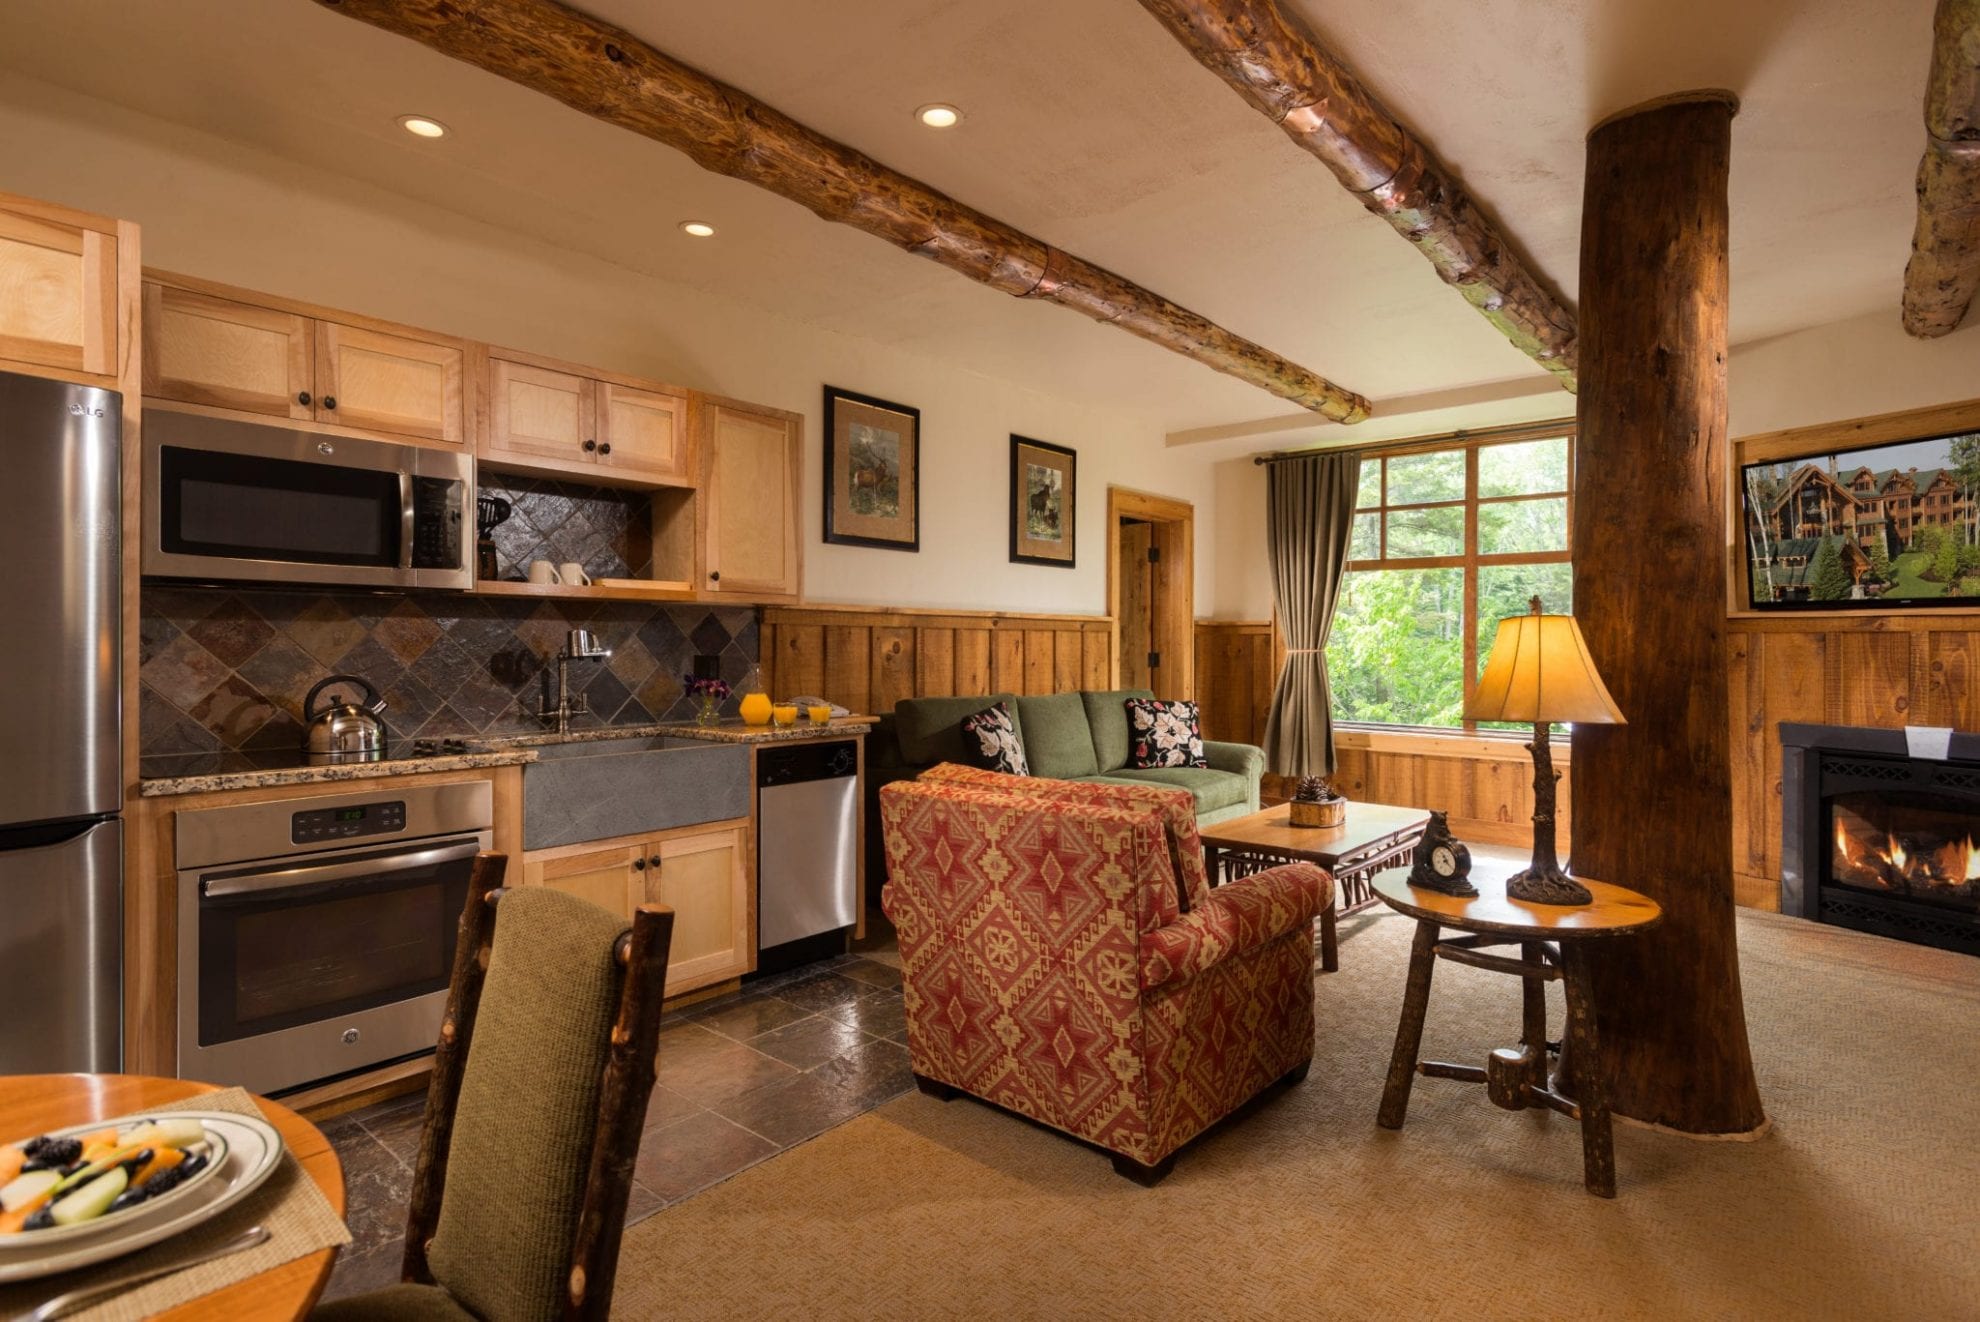 Suite with kitchen, living room and fireplace.